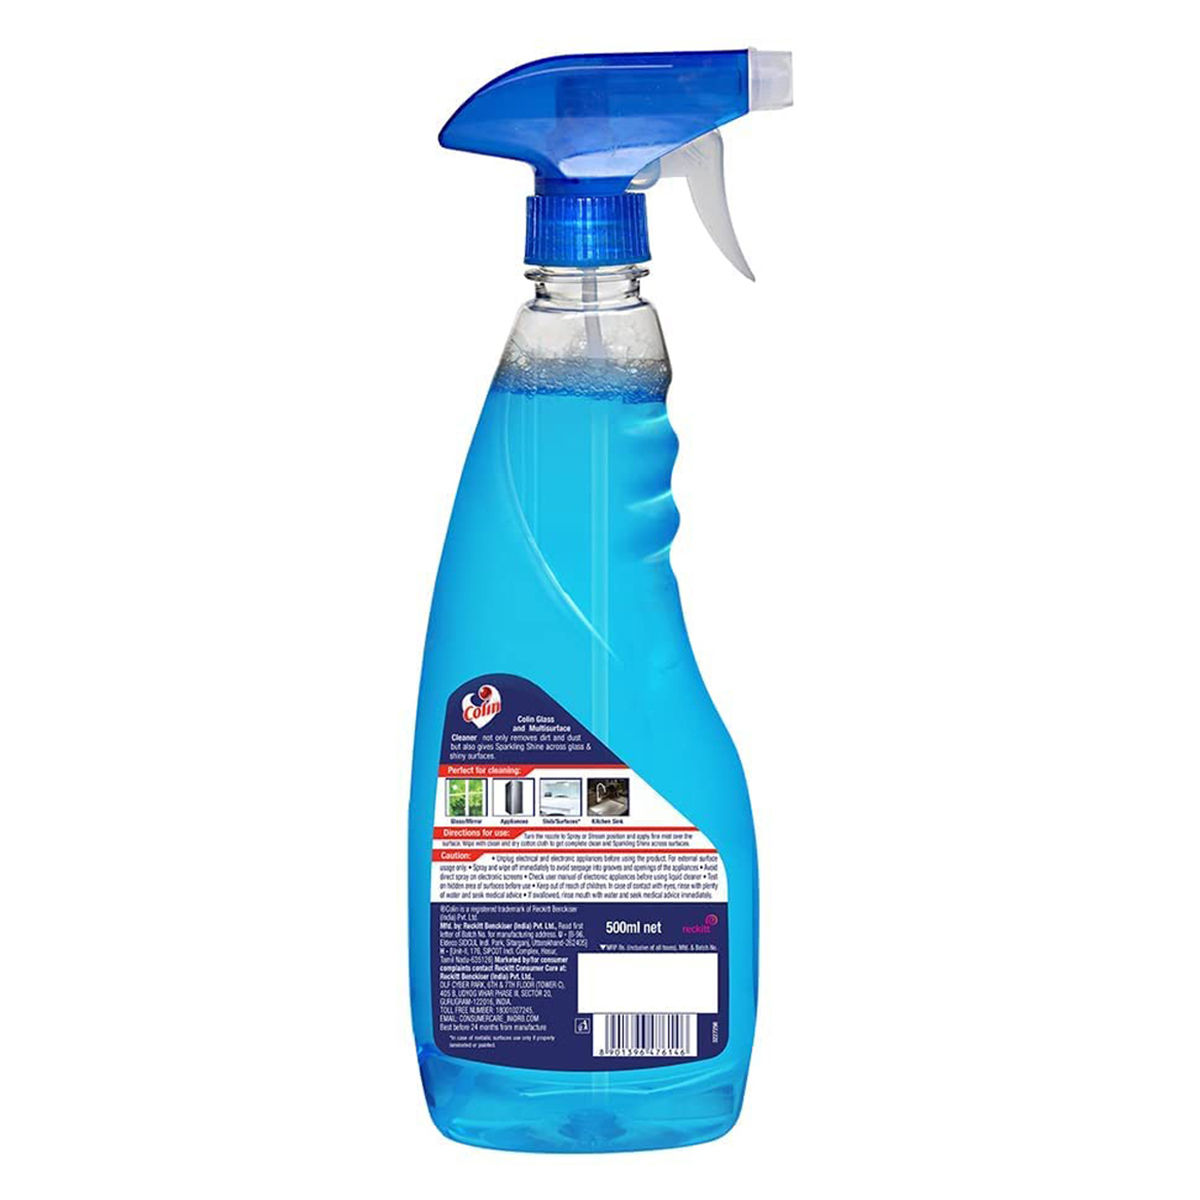 Colin Glass Cleaner, 500 ml Price, Uses, Side Effects, Composition ...